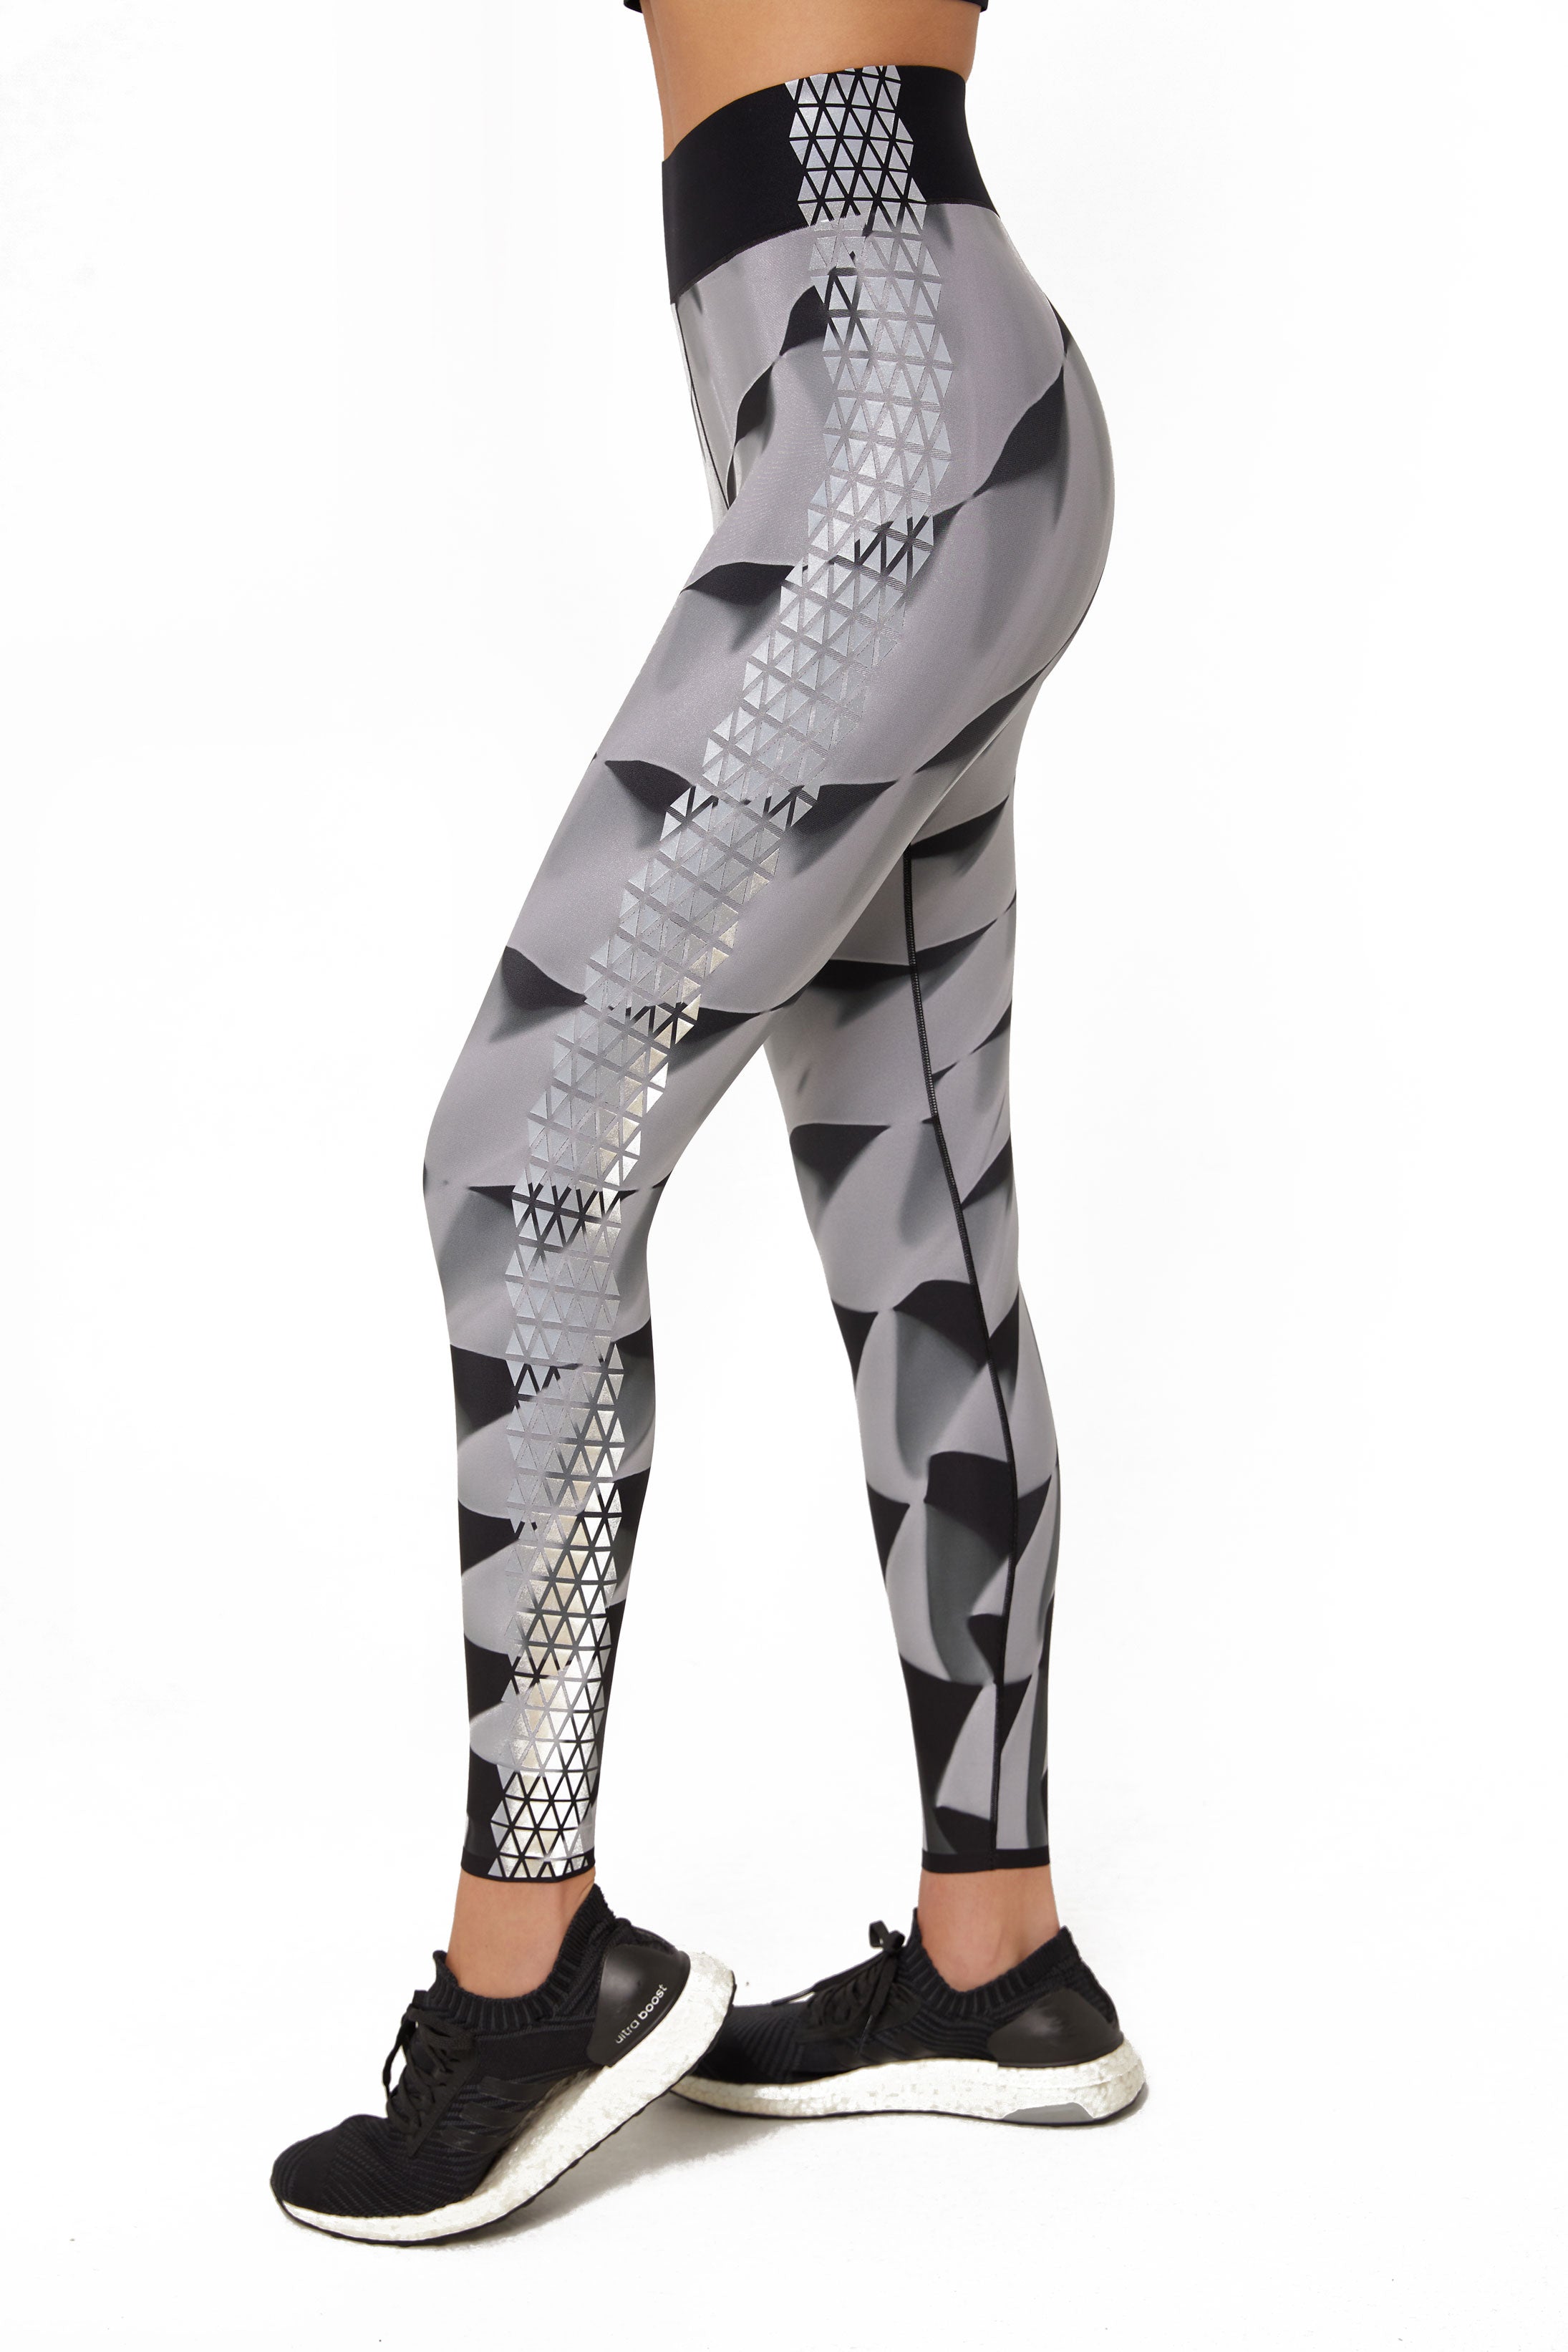 Get It Fast Oculus Bonded All Over Print Ultra High Legging – Ultracor